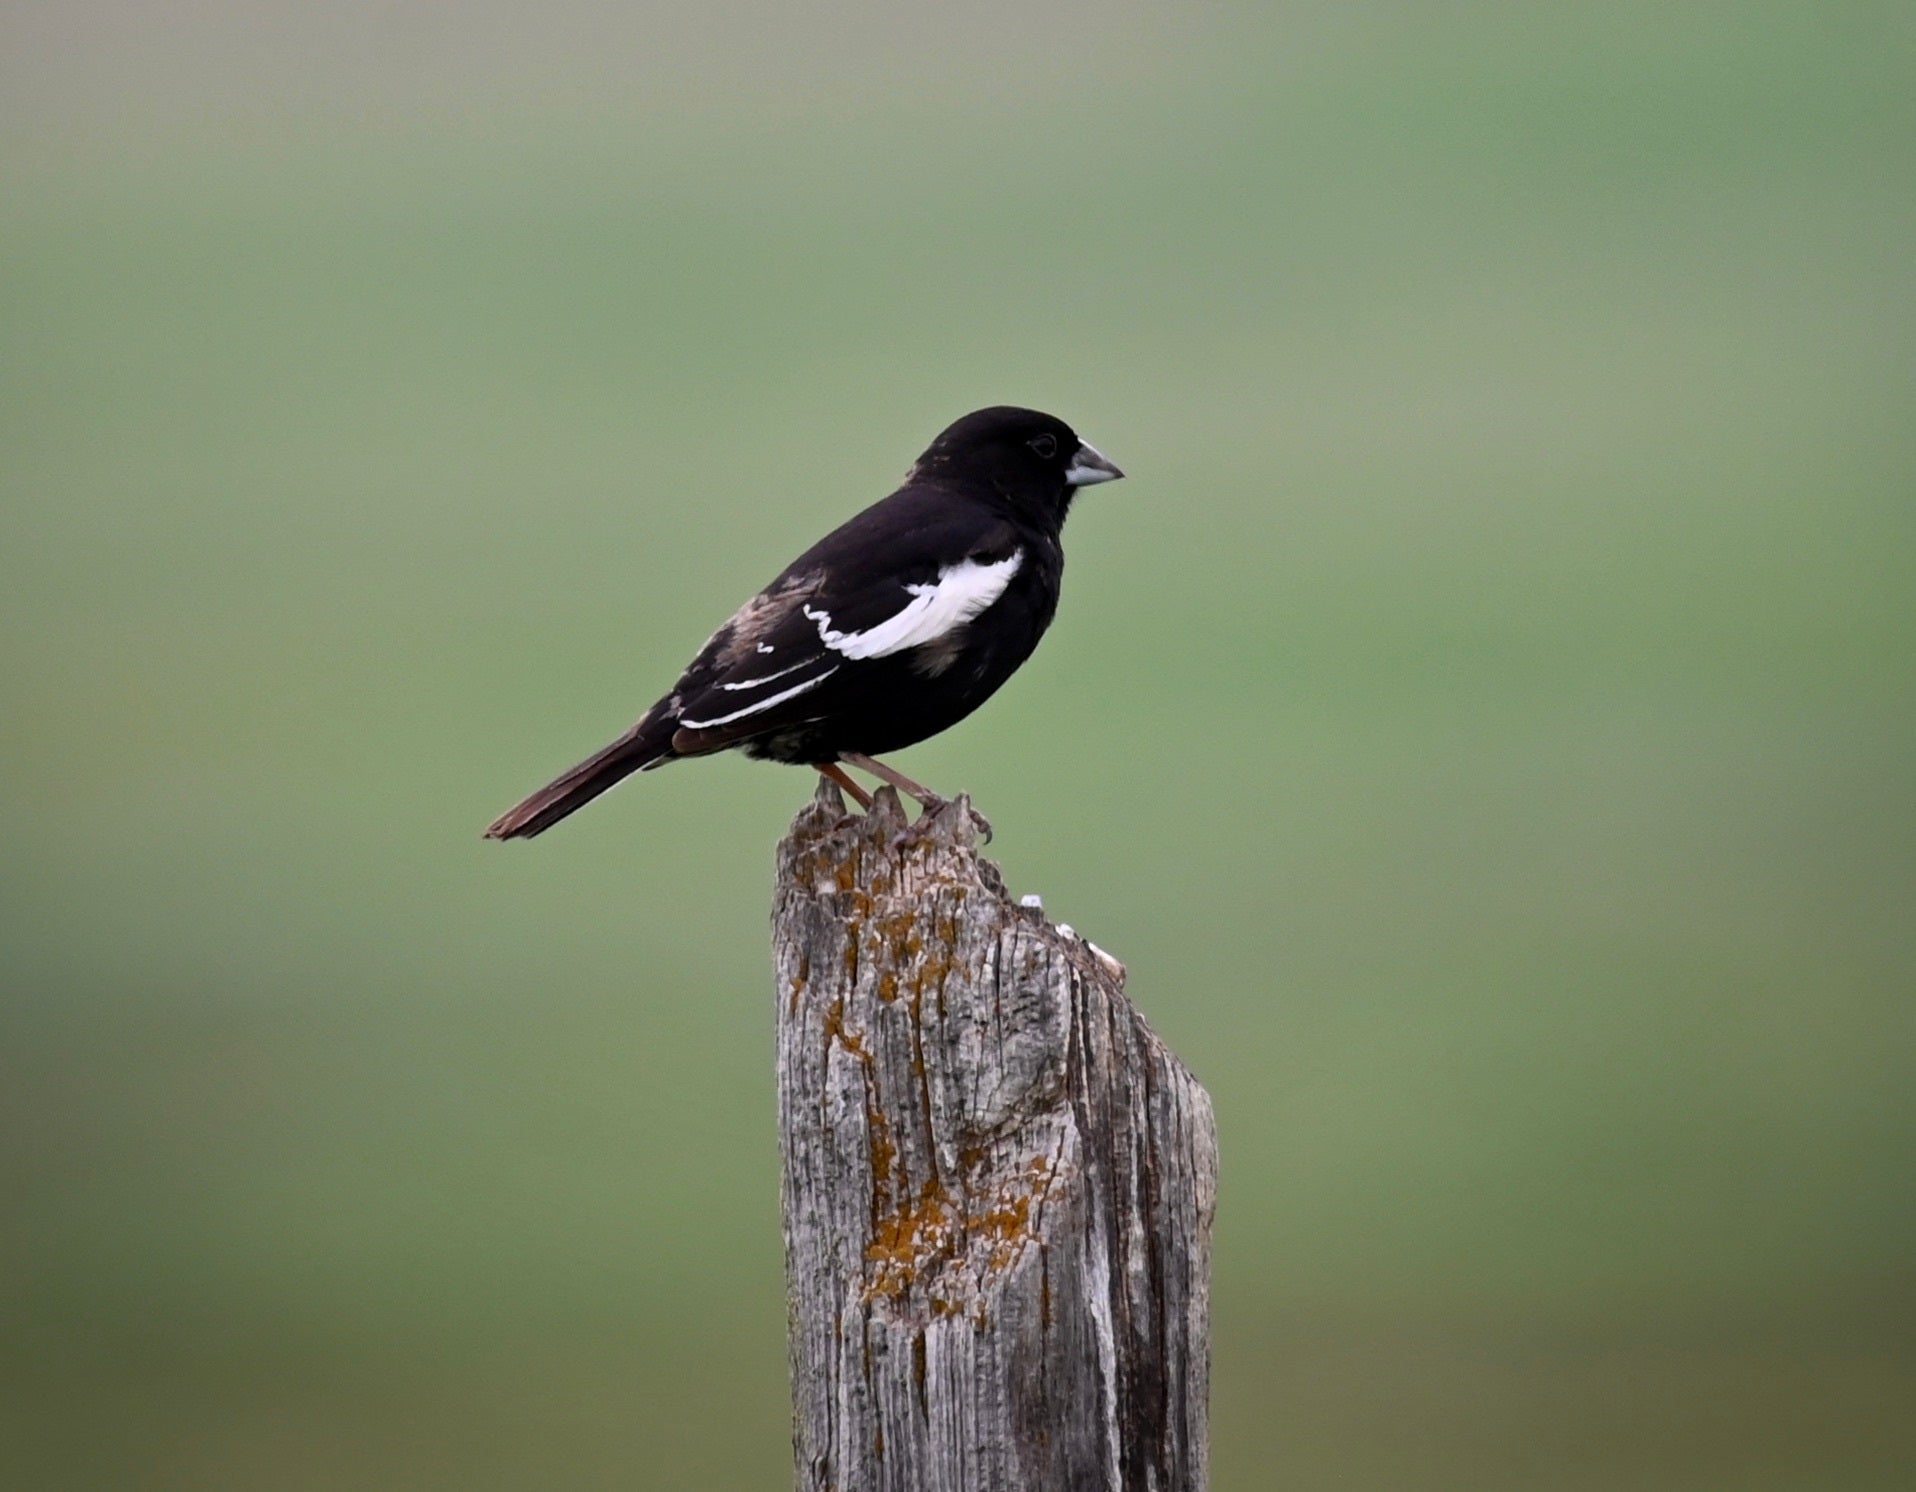 a sharp black bird with white shoulder patch sits on a fence post